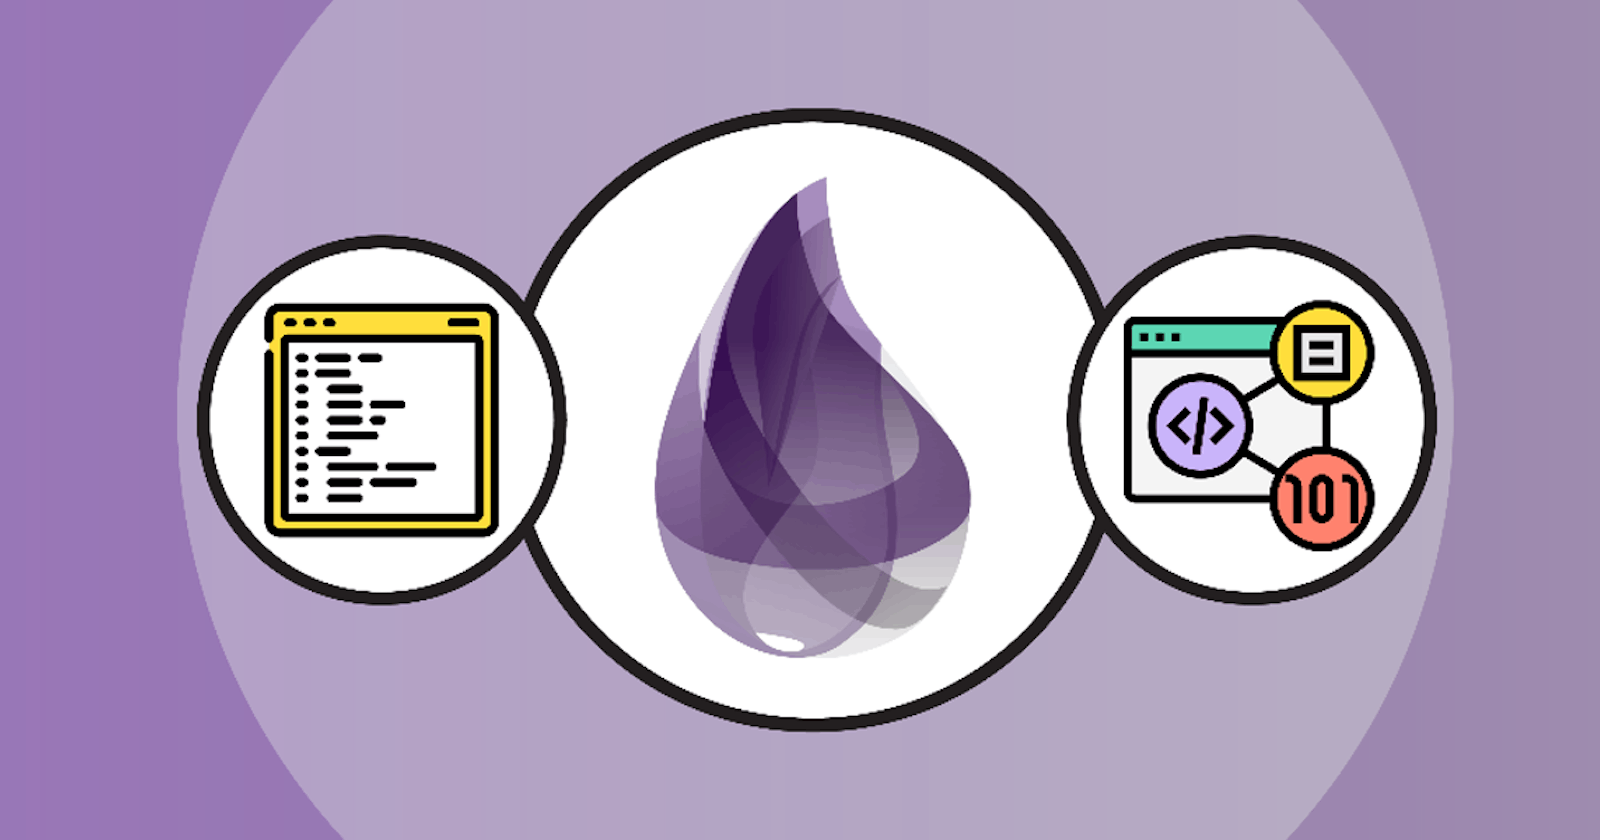 Getting Started with Functional Programming Using Elixir